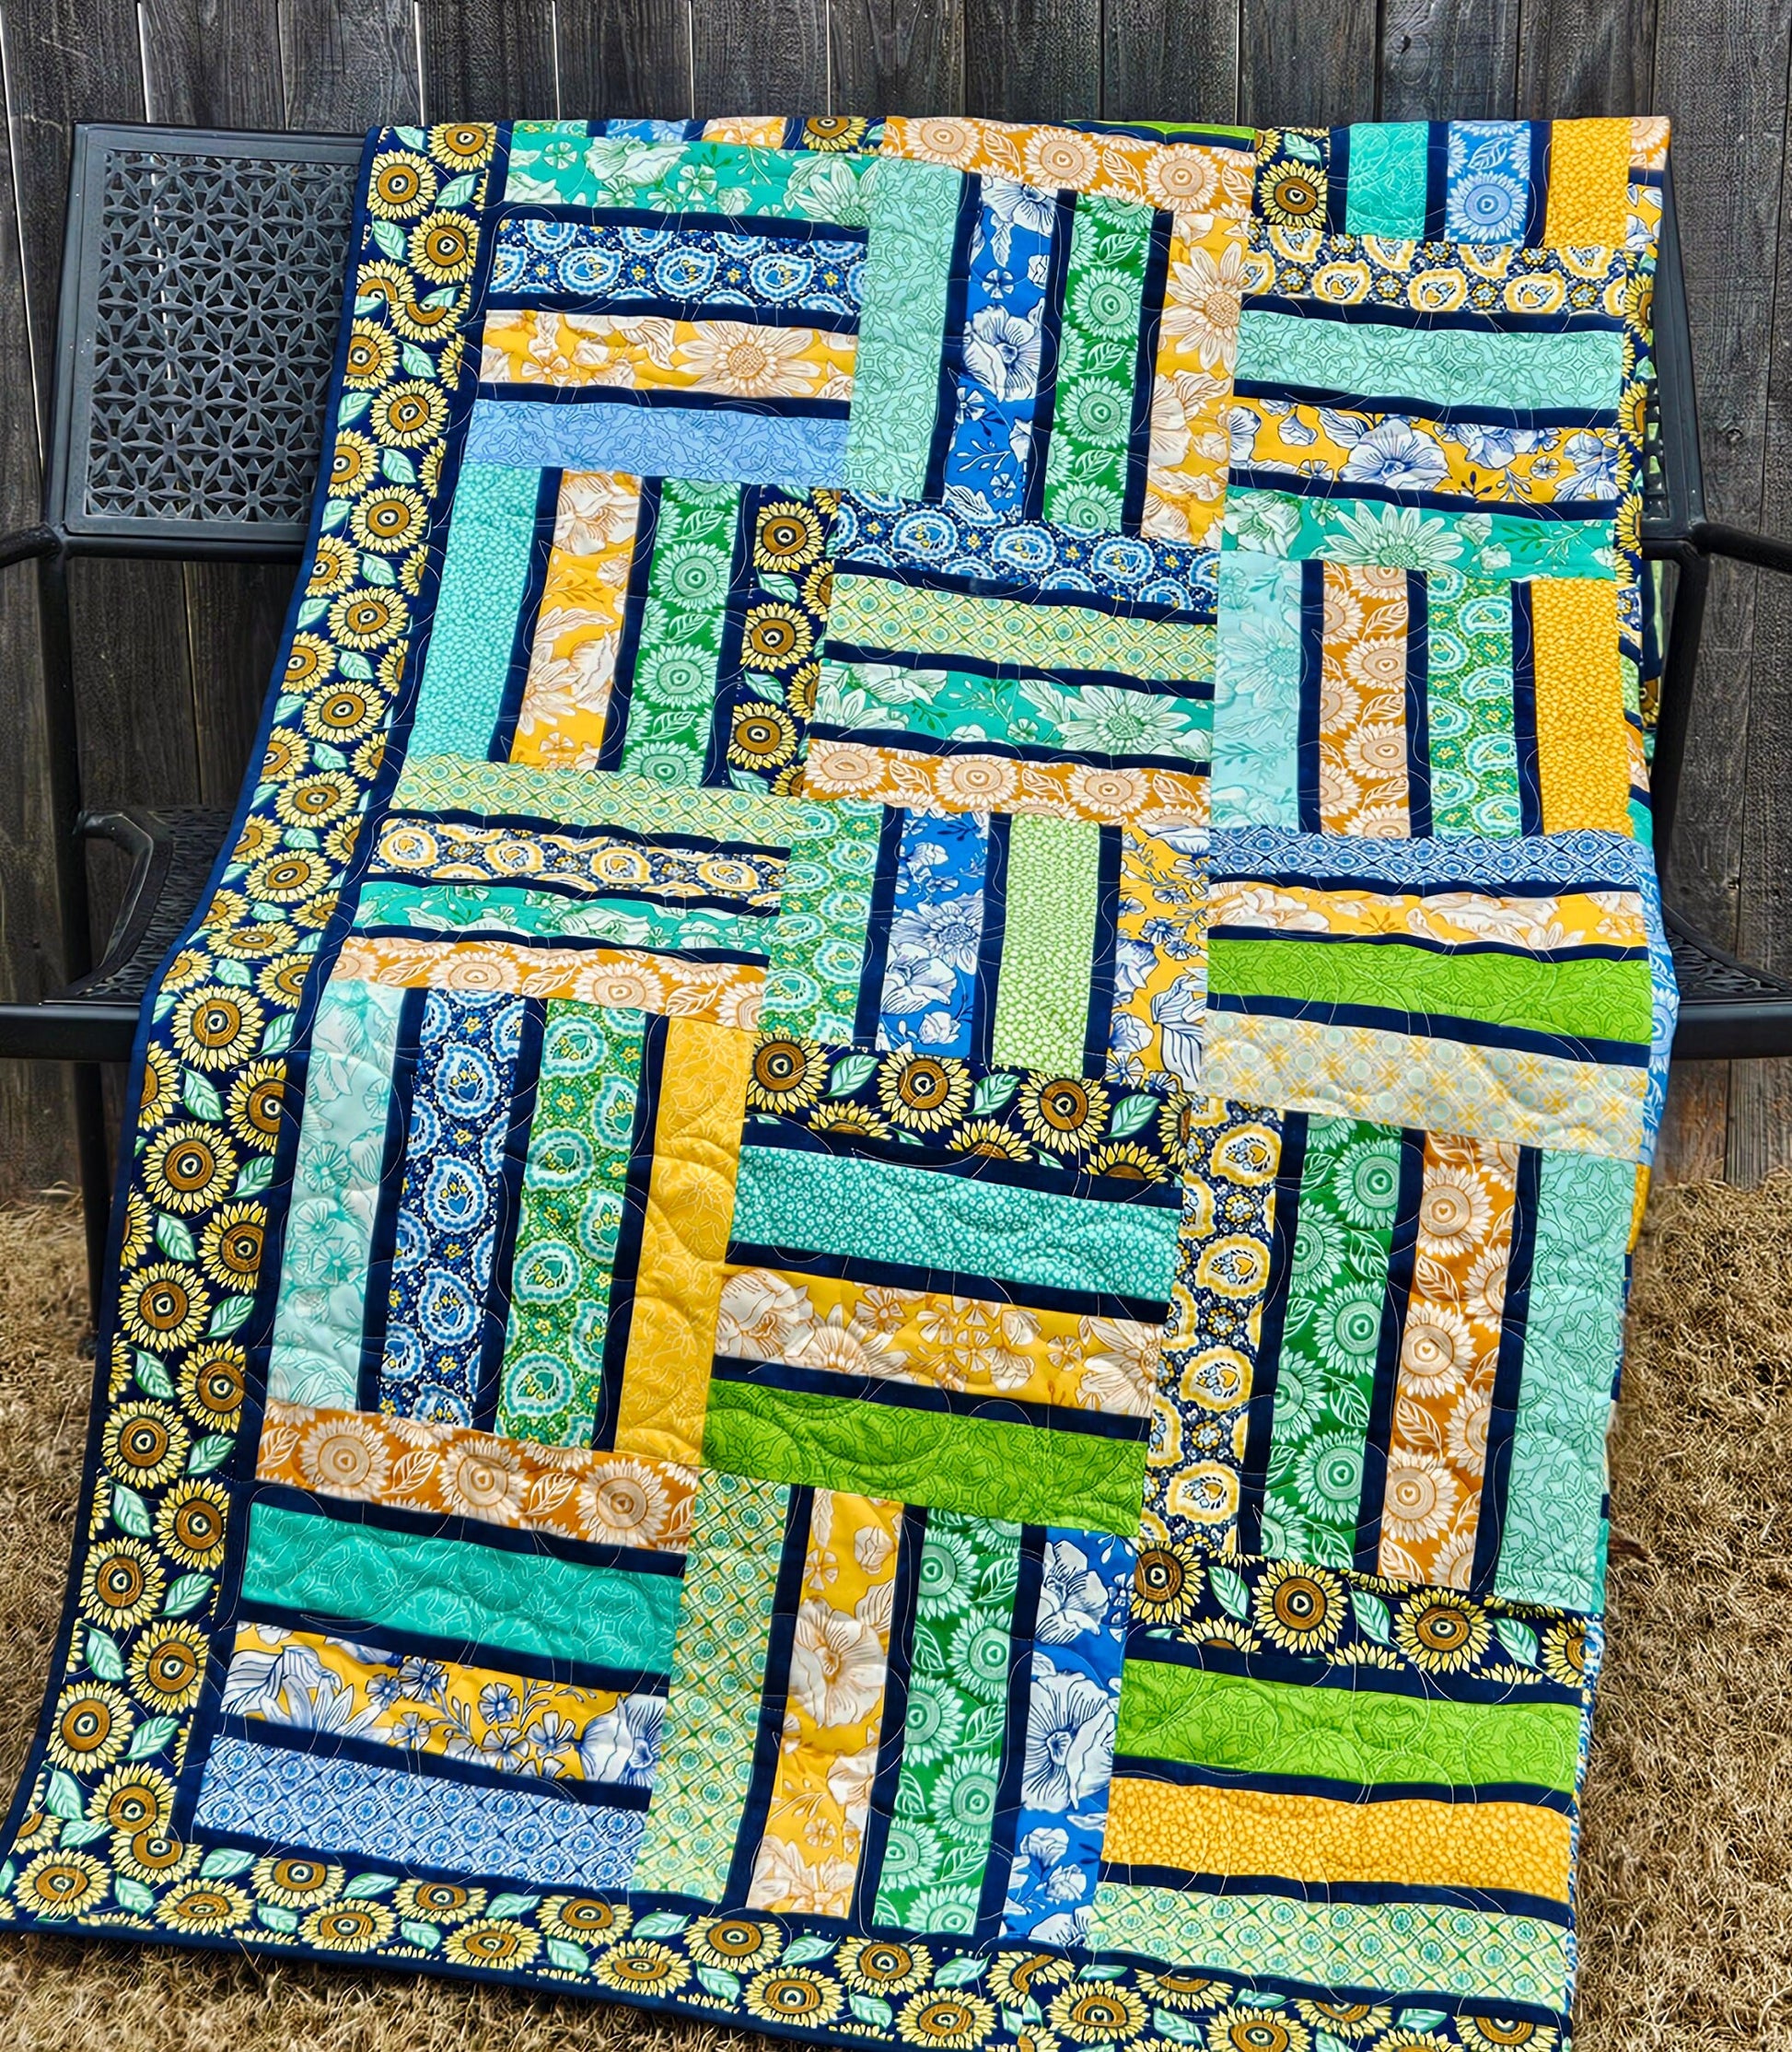 Blue Yellow and Green Sunflower Themed Throw Quilt, Handmade Quilt with Sunflower Florals and Blue Accents 63" X 72"